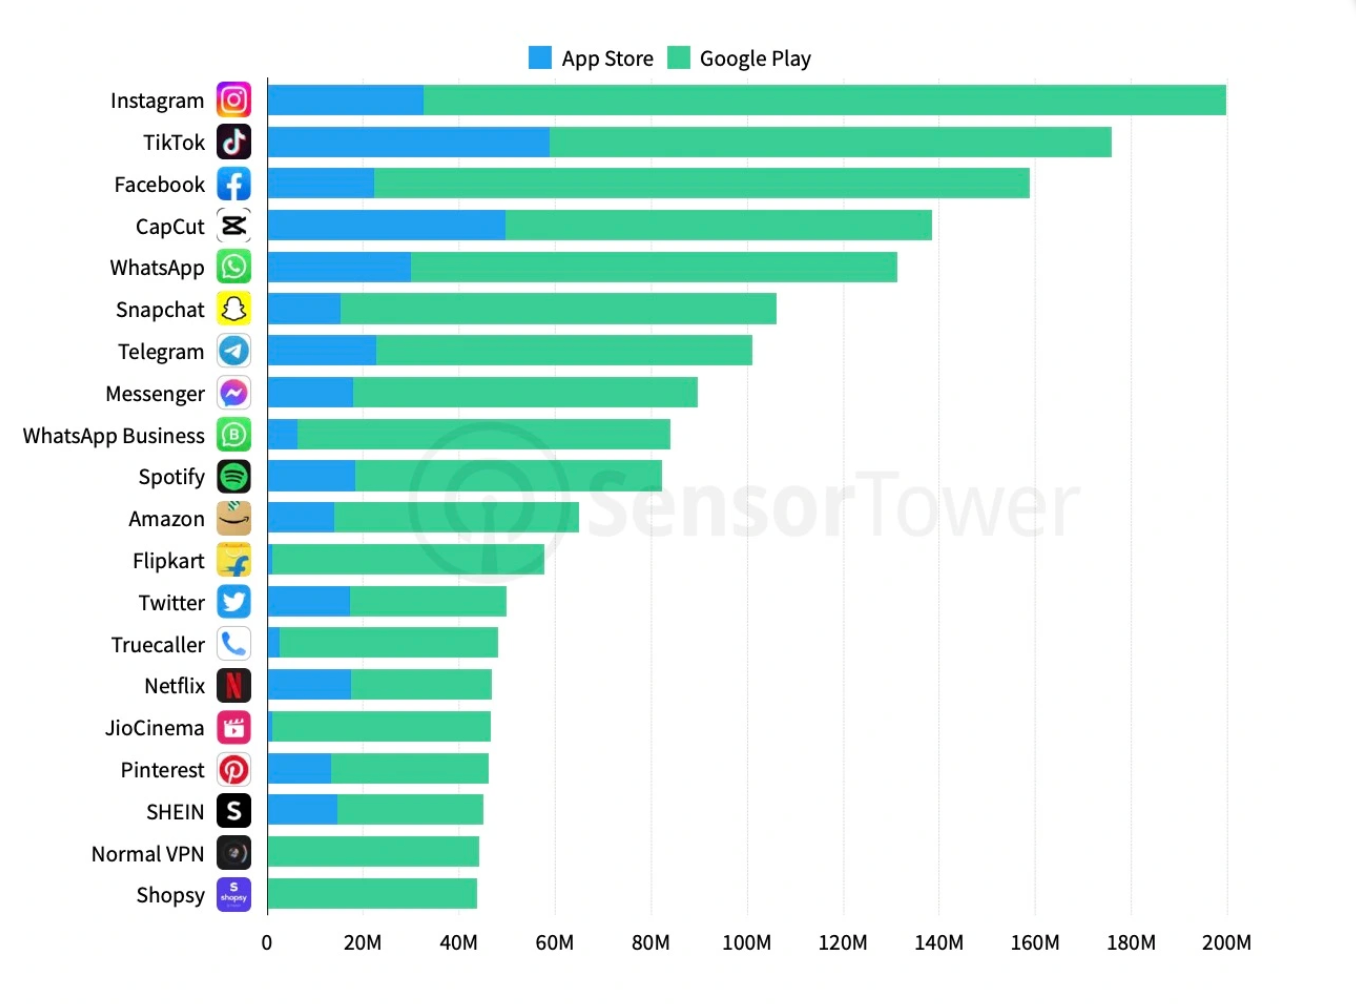 Chart showing the most downloaded apps in Q4, with Instagram, TikTok and Facebook in the top 3